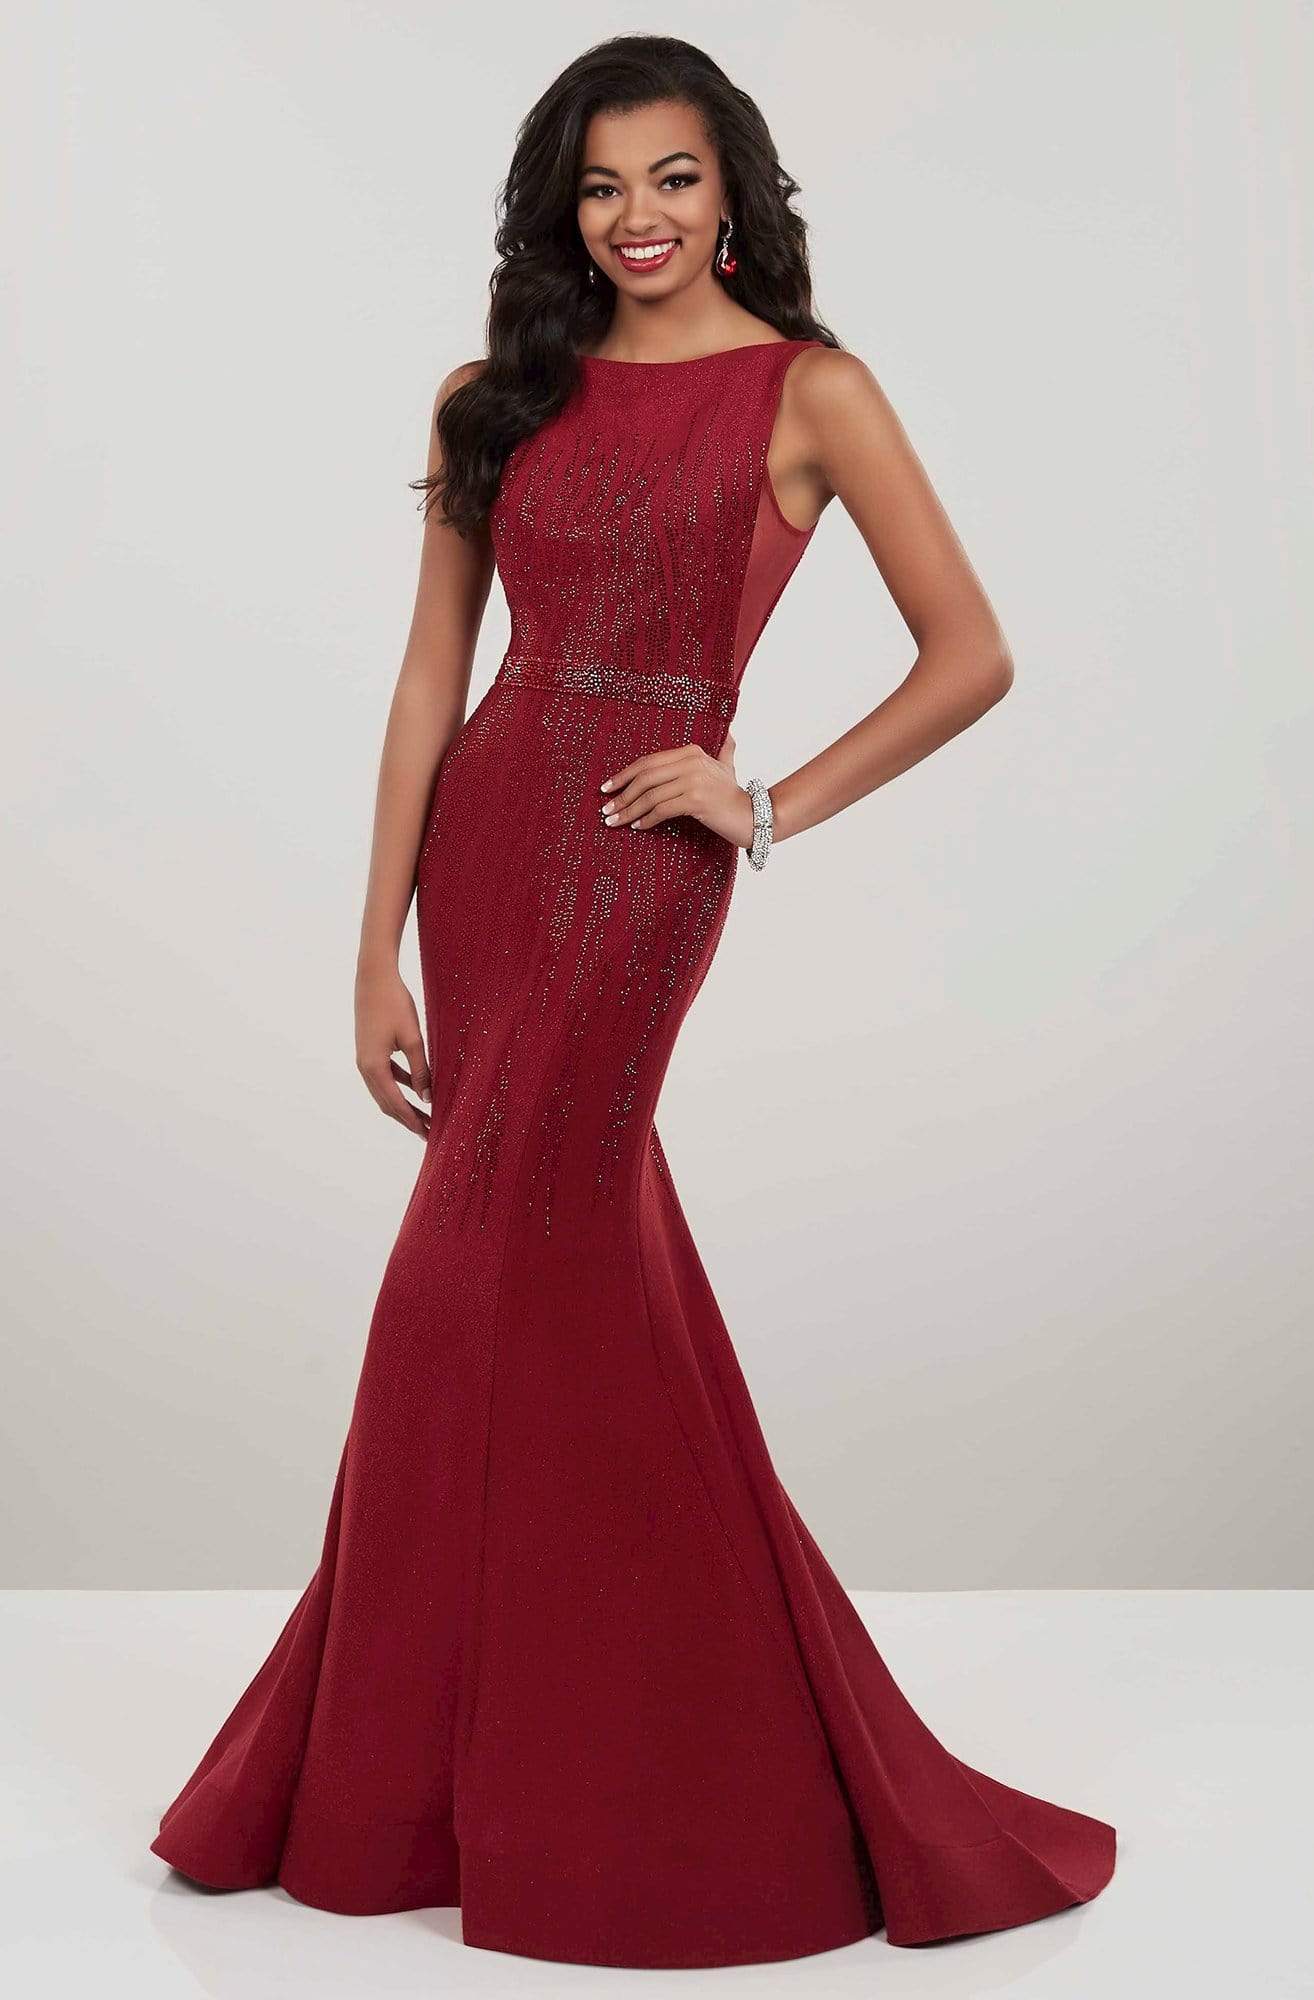 Panoply - 14946SC Sleeveless Low V-Back Fit and Flare Gown